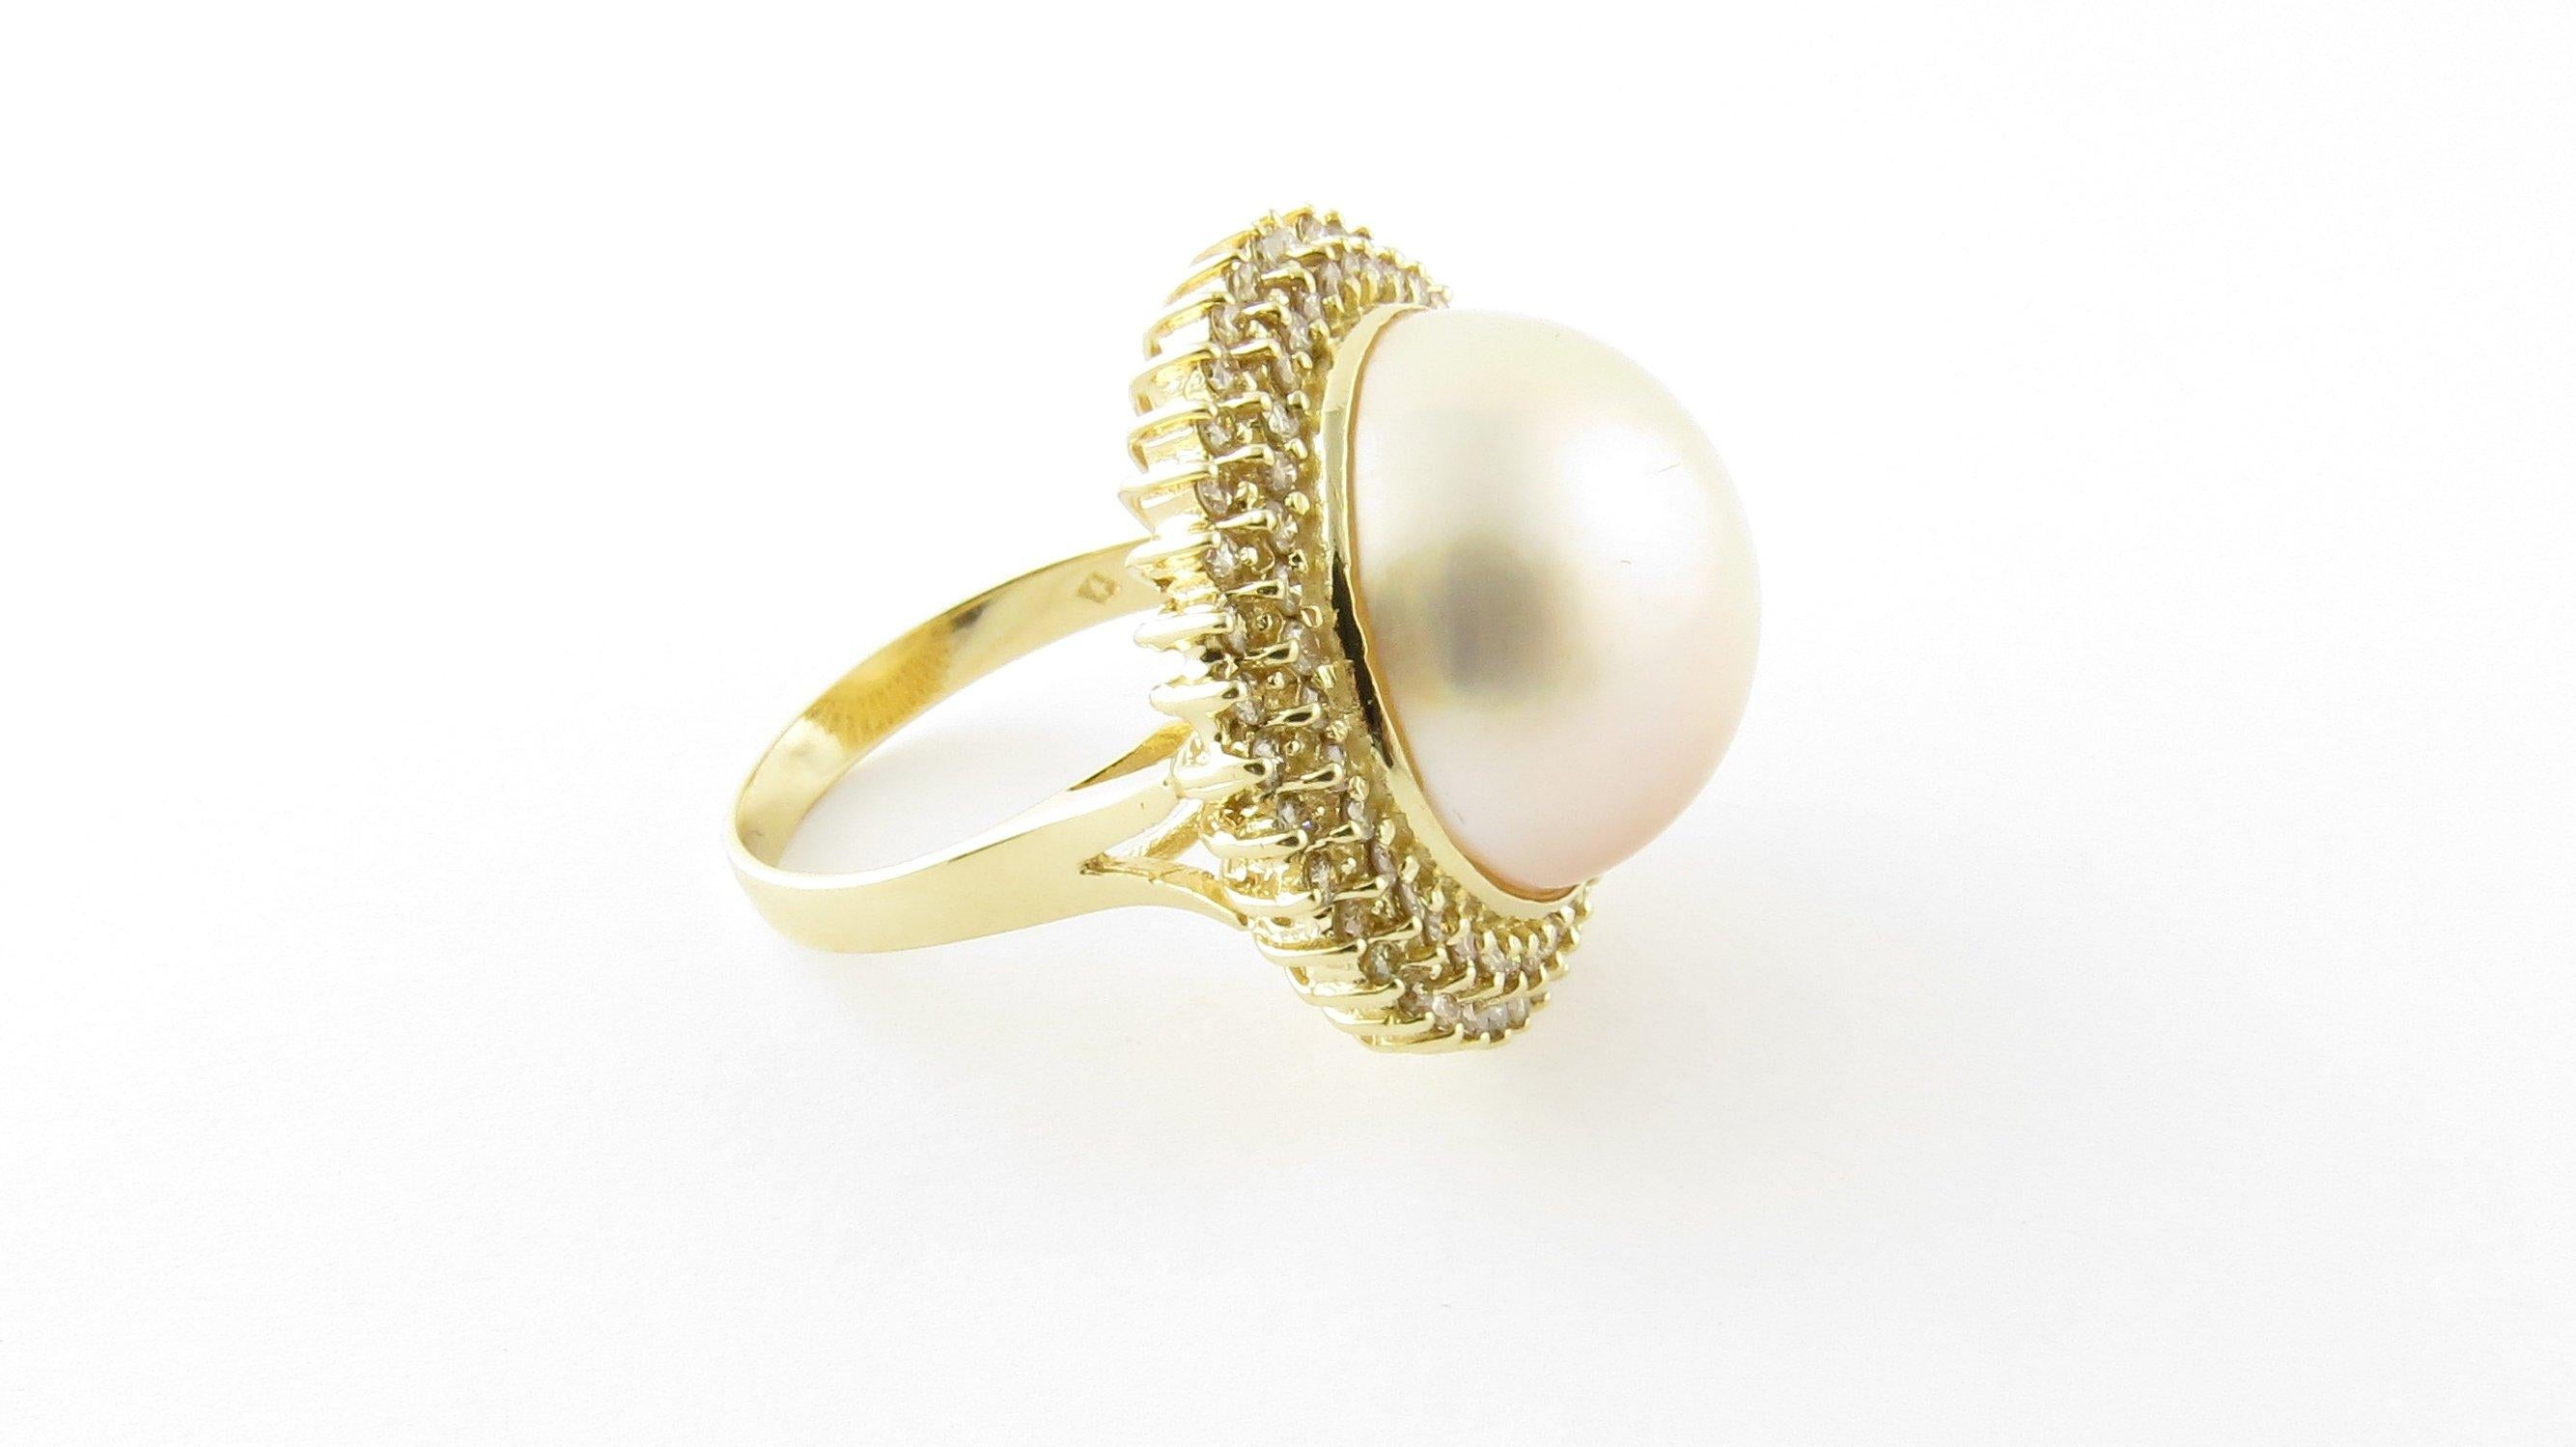 Vintage 14 Karat Yellow Gold Pearl and Diamond Ring Size 7.25- 
This spectacular ring features one Mabe pearl (17 mm) surrounded by 79 round brilliant cut diamonds (40 white outer , 39 champagne inner) set in classic 14K yellow gold. 
Top of ring